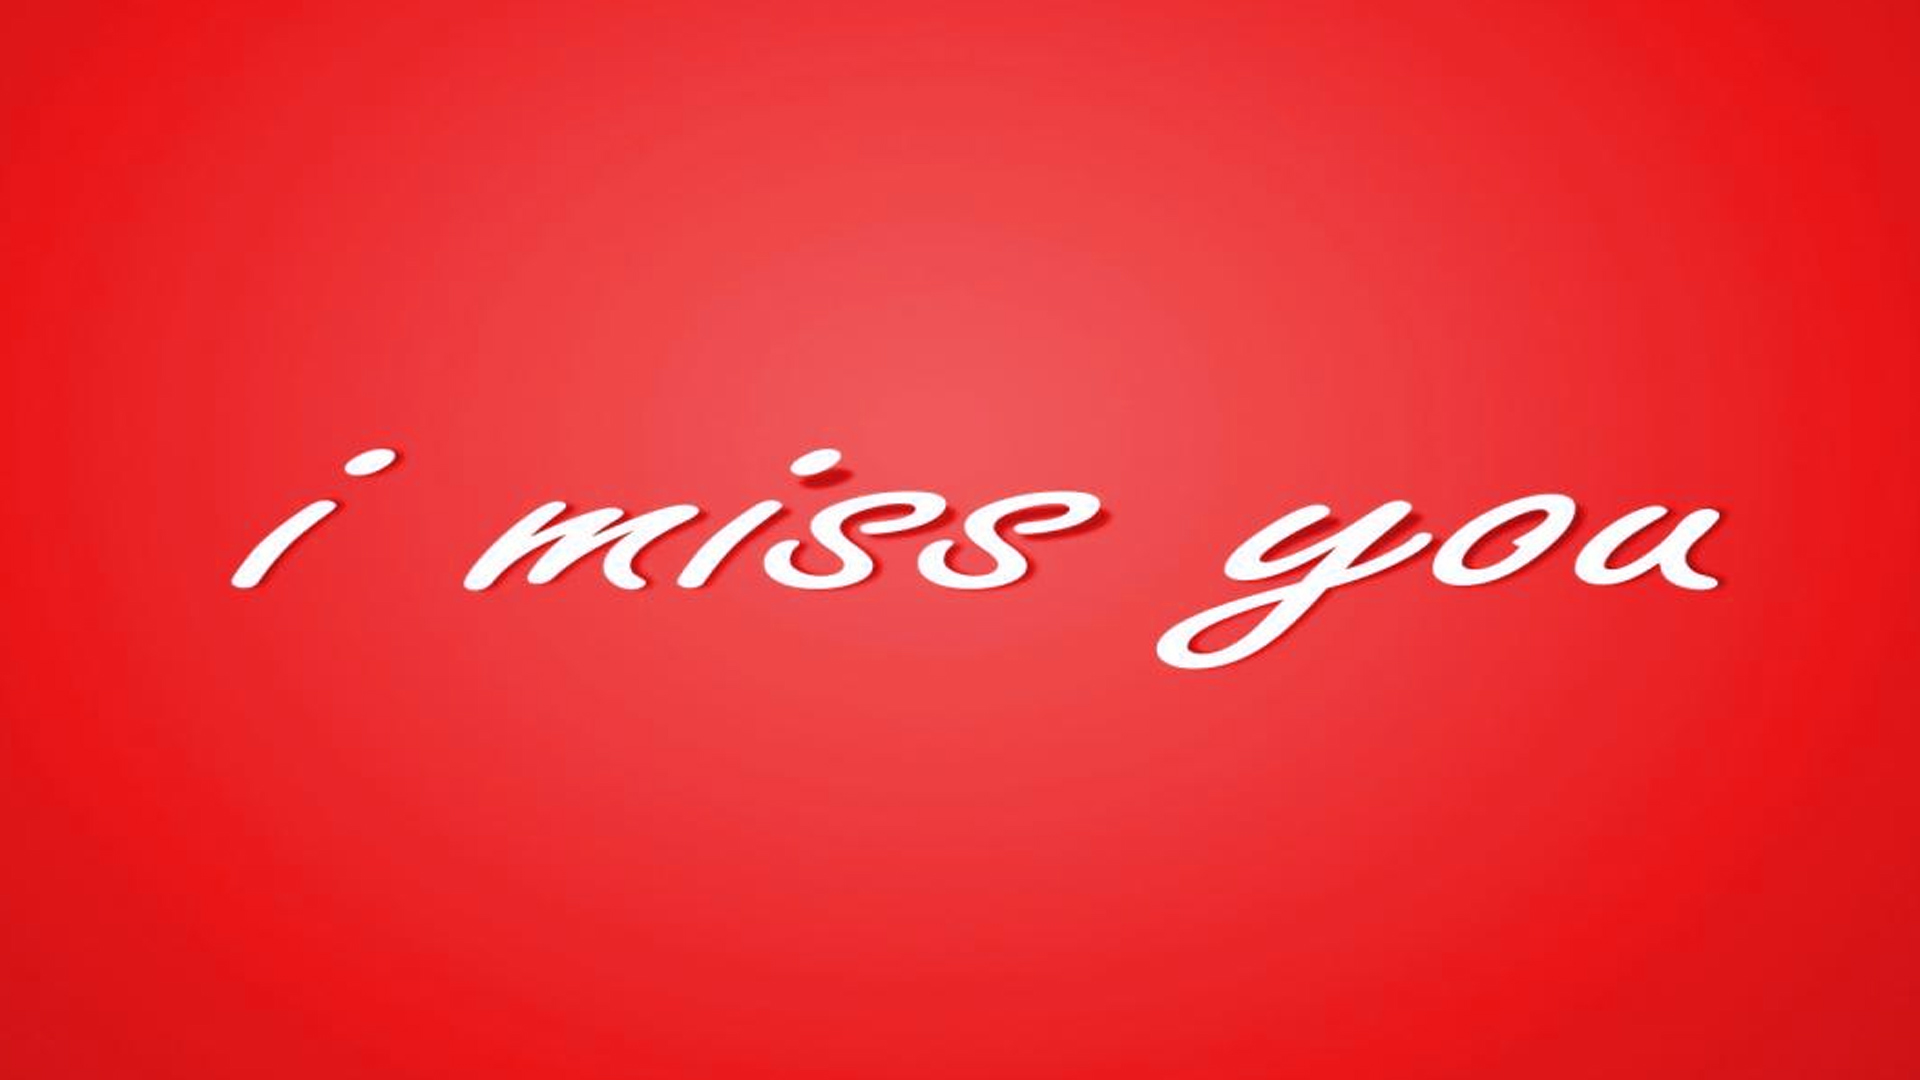 Miss You HD Wallpaper From The Above Resolutions If Don T Find